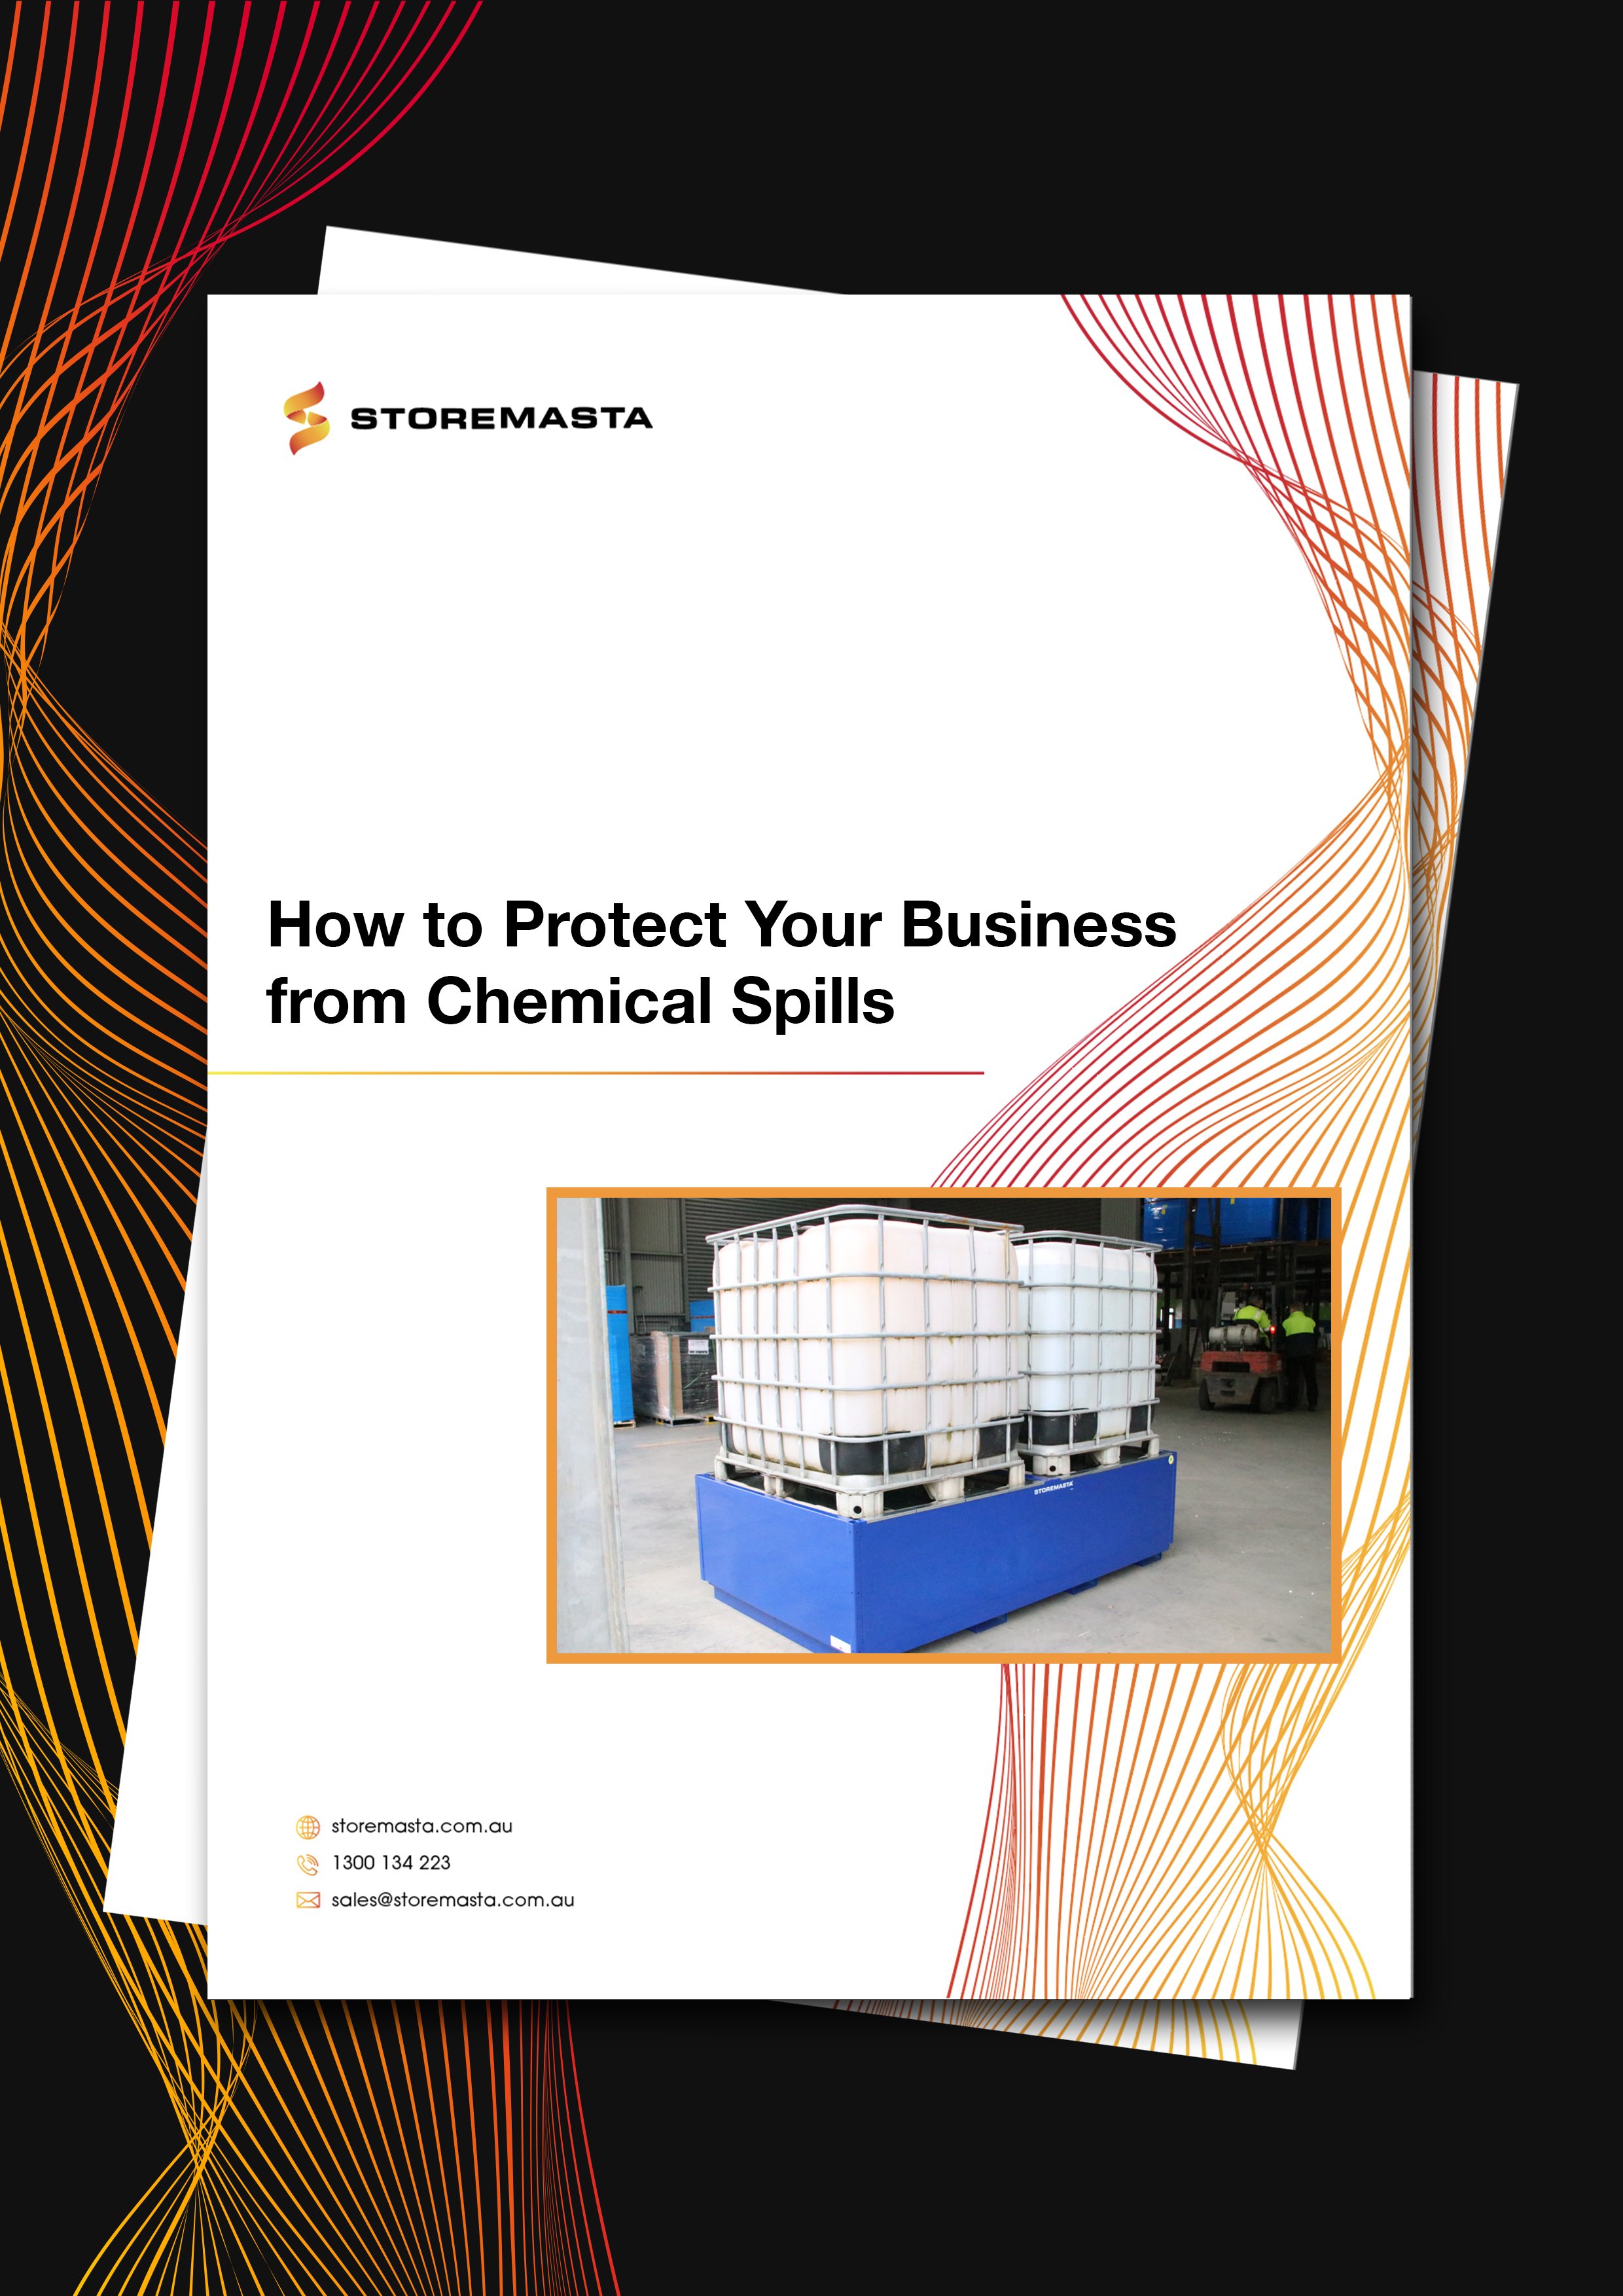 How to protect your business from chemical spills